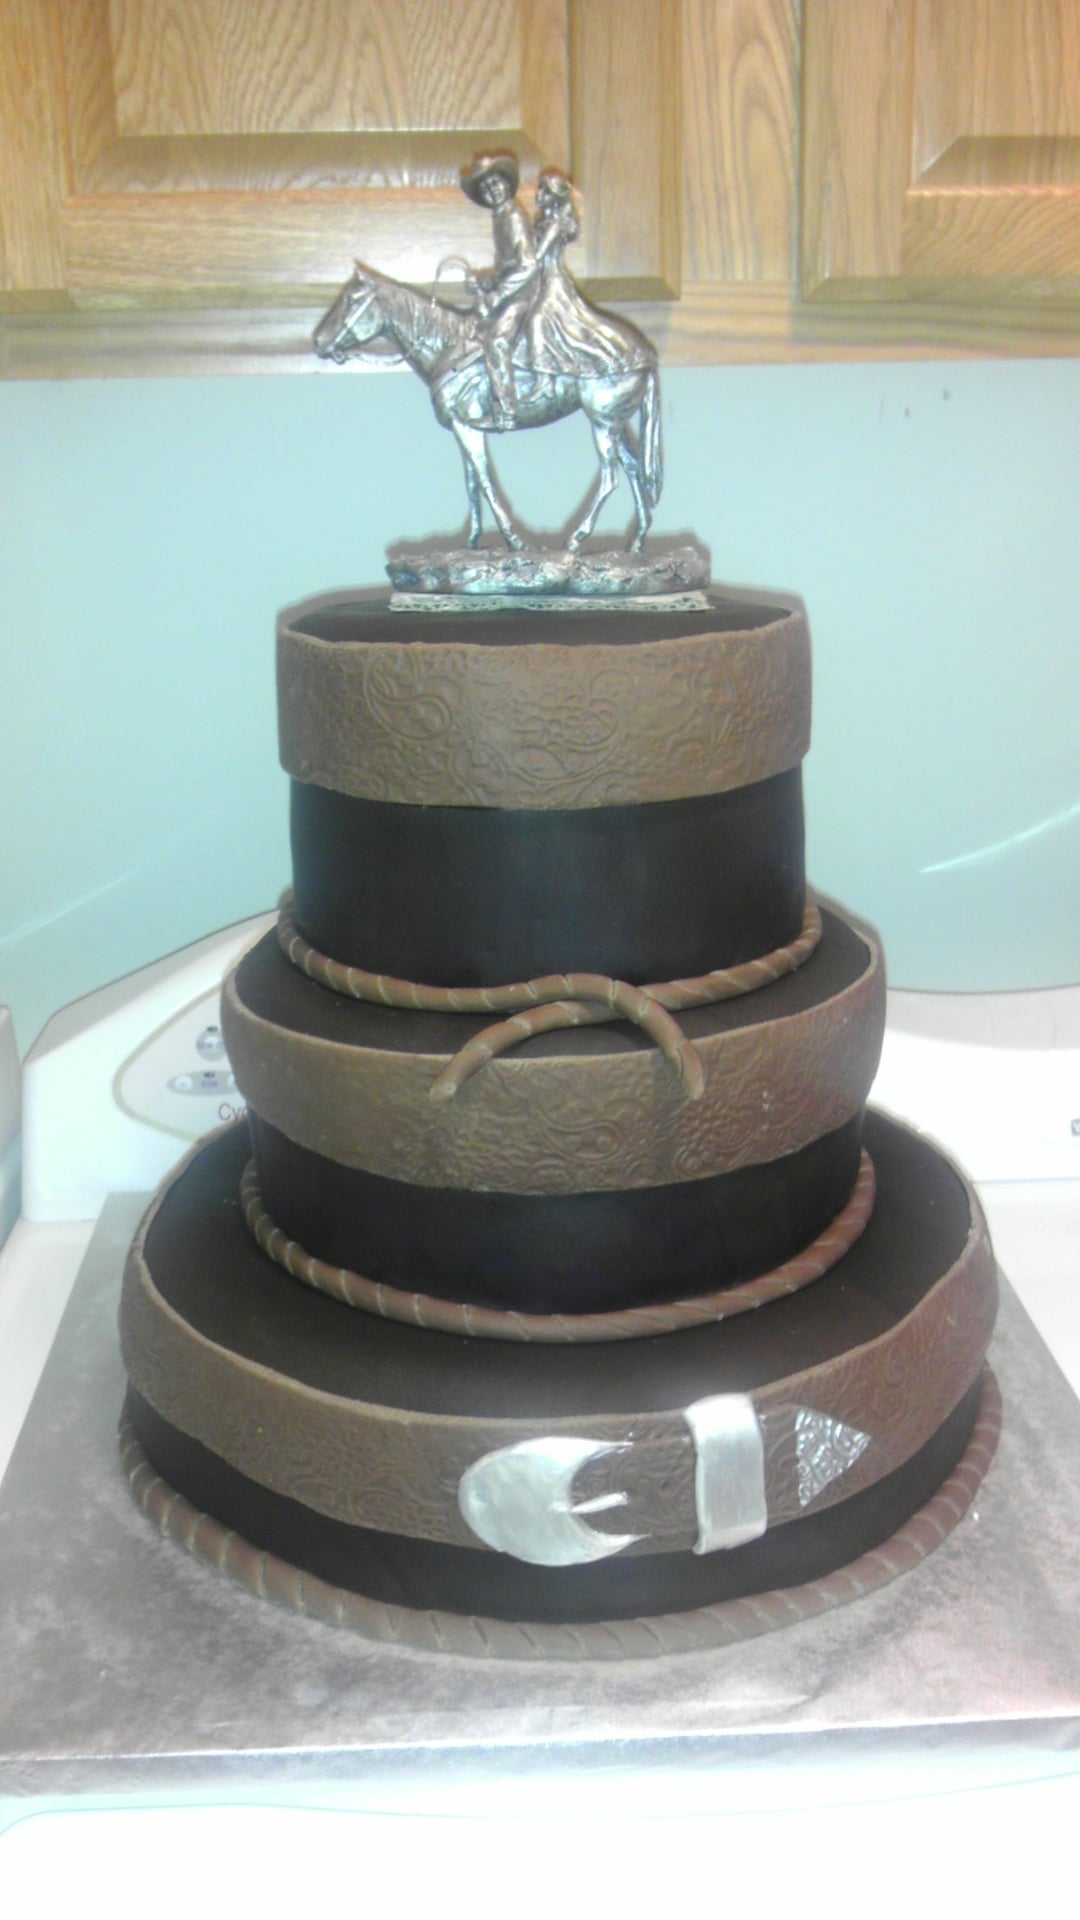 Custom three tier cake with a cowboy figurine on it.Made by Nan's Nummies